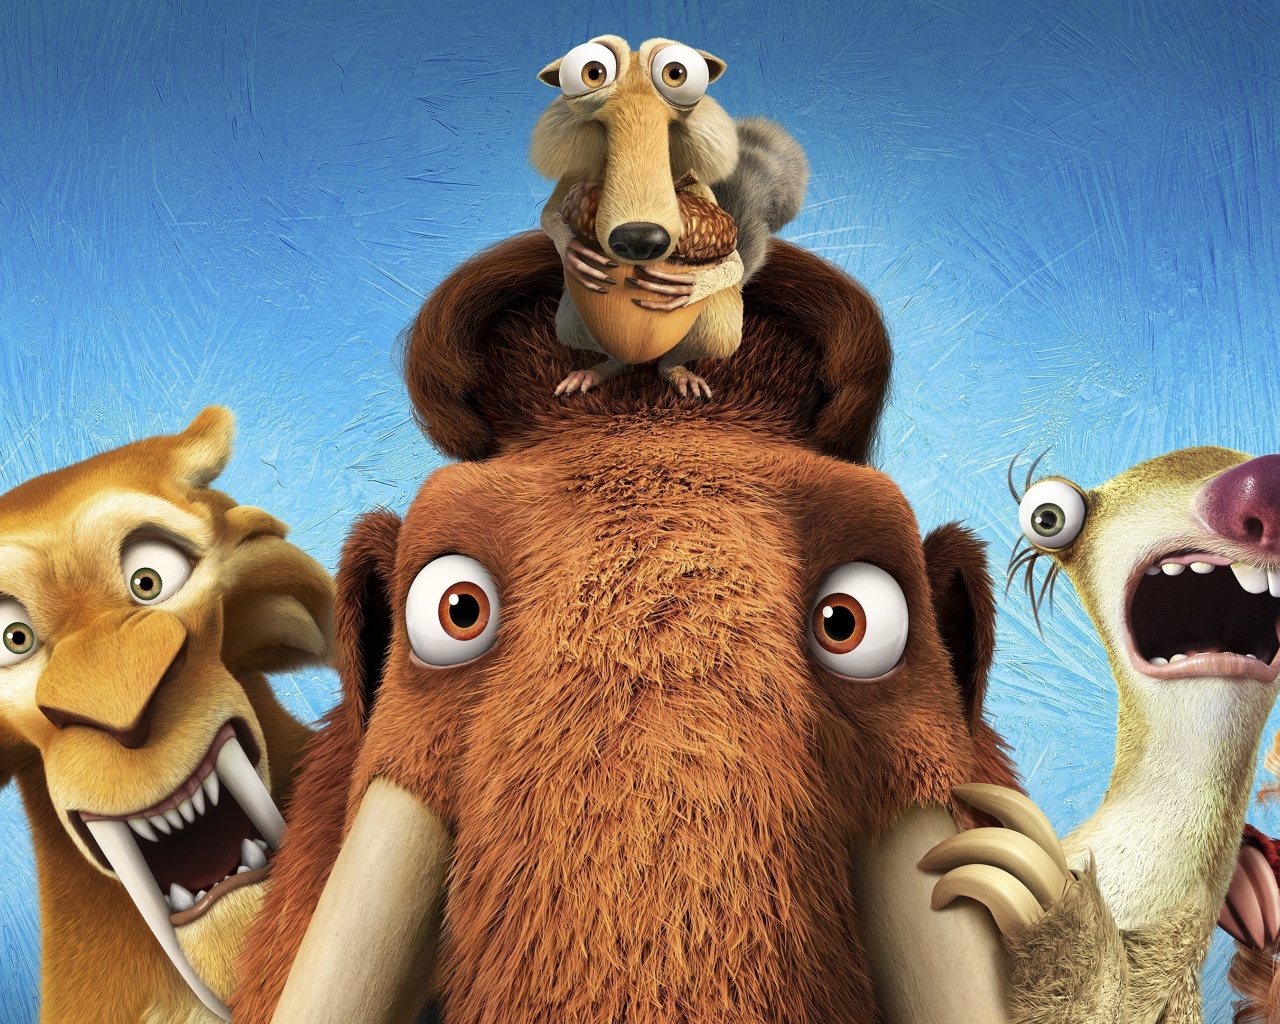 Das Ice Age 5 Collision Course with Diego, Manny, Scrat, Sid, Mammoths Wallpaper 1280x1024